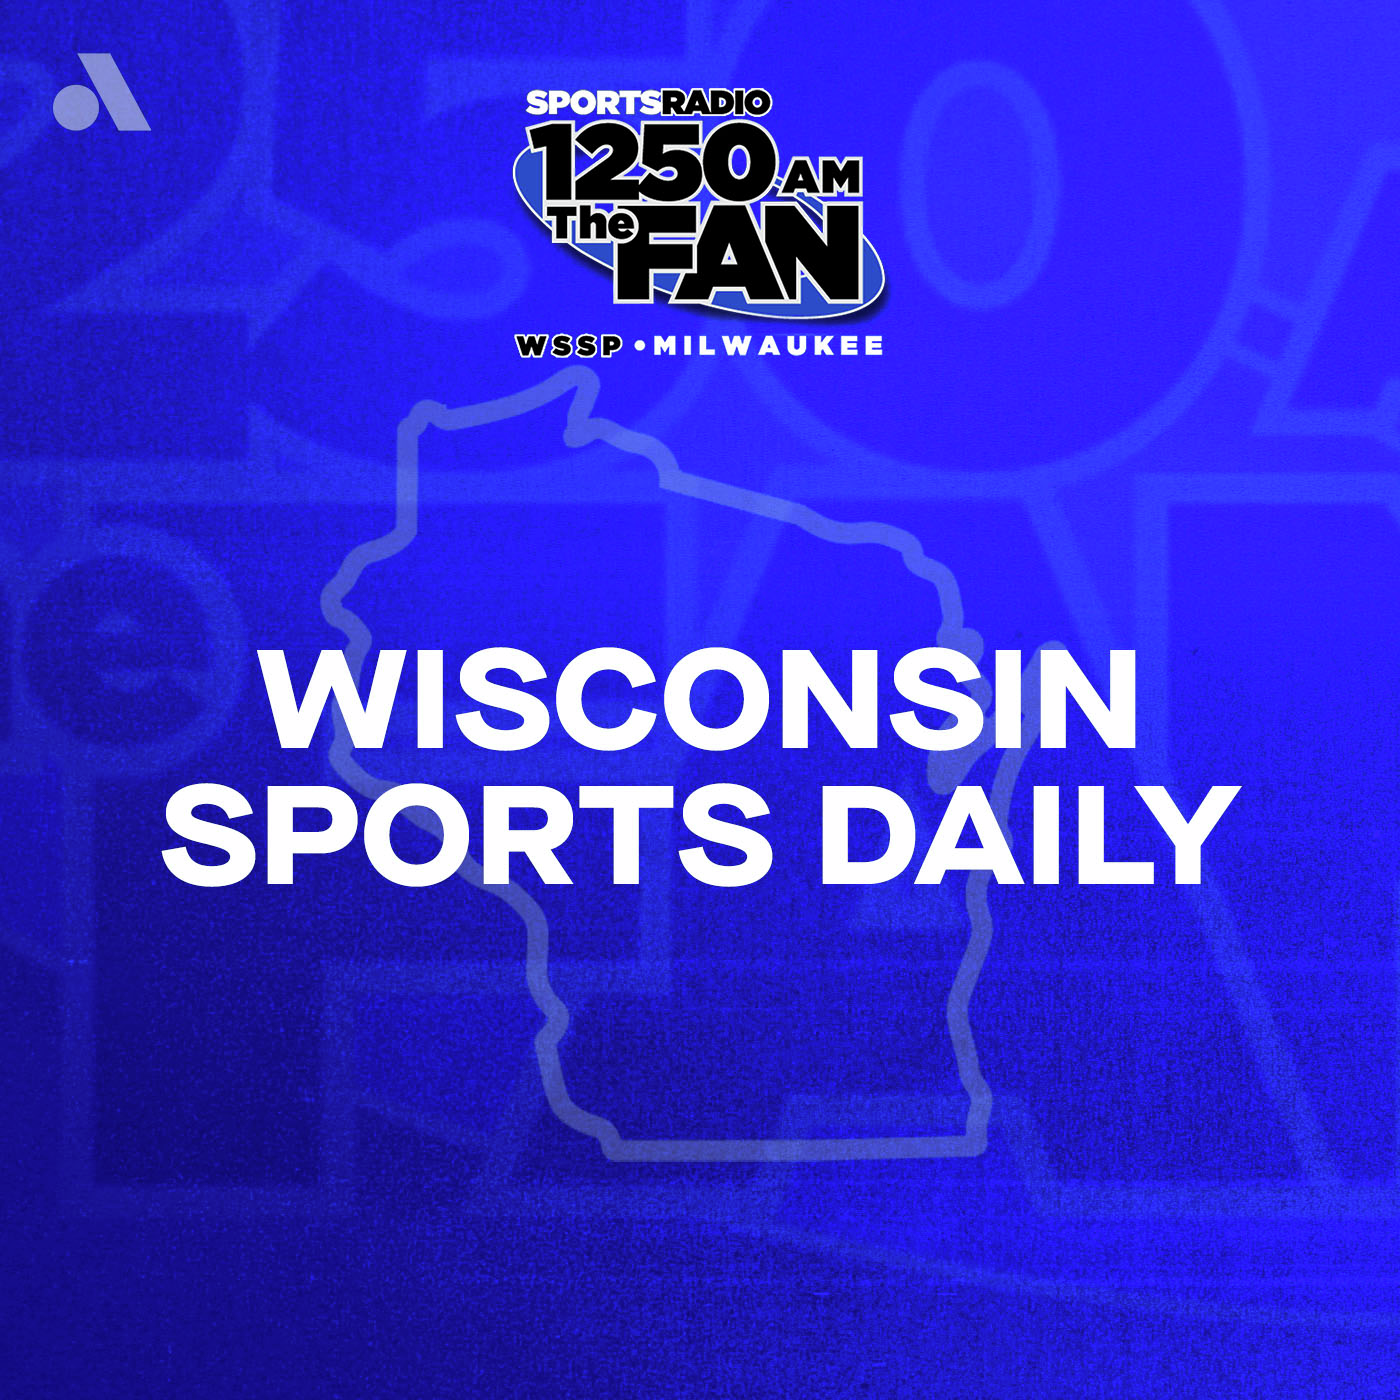 Tuesday, June 4th: Paul Noonan Joins Wisconsin Sports Daily!